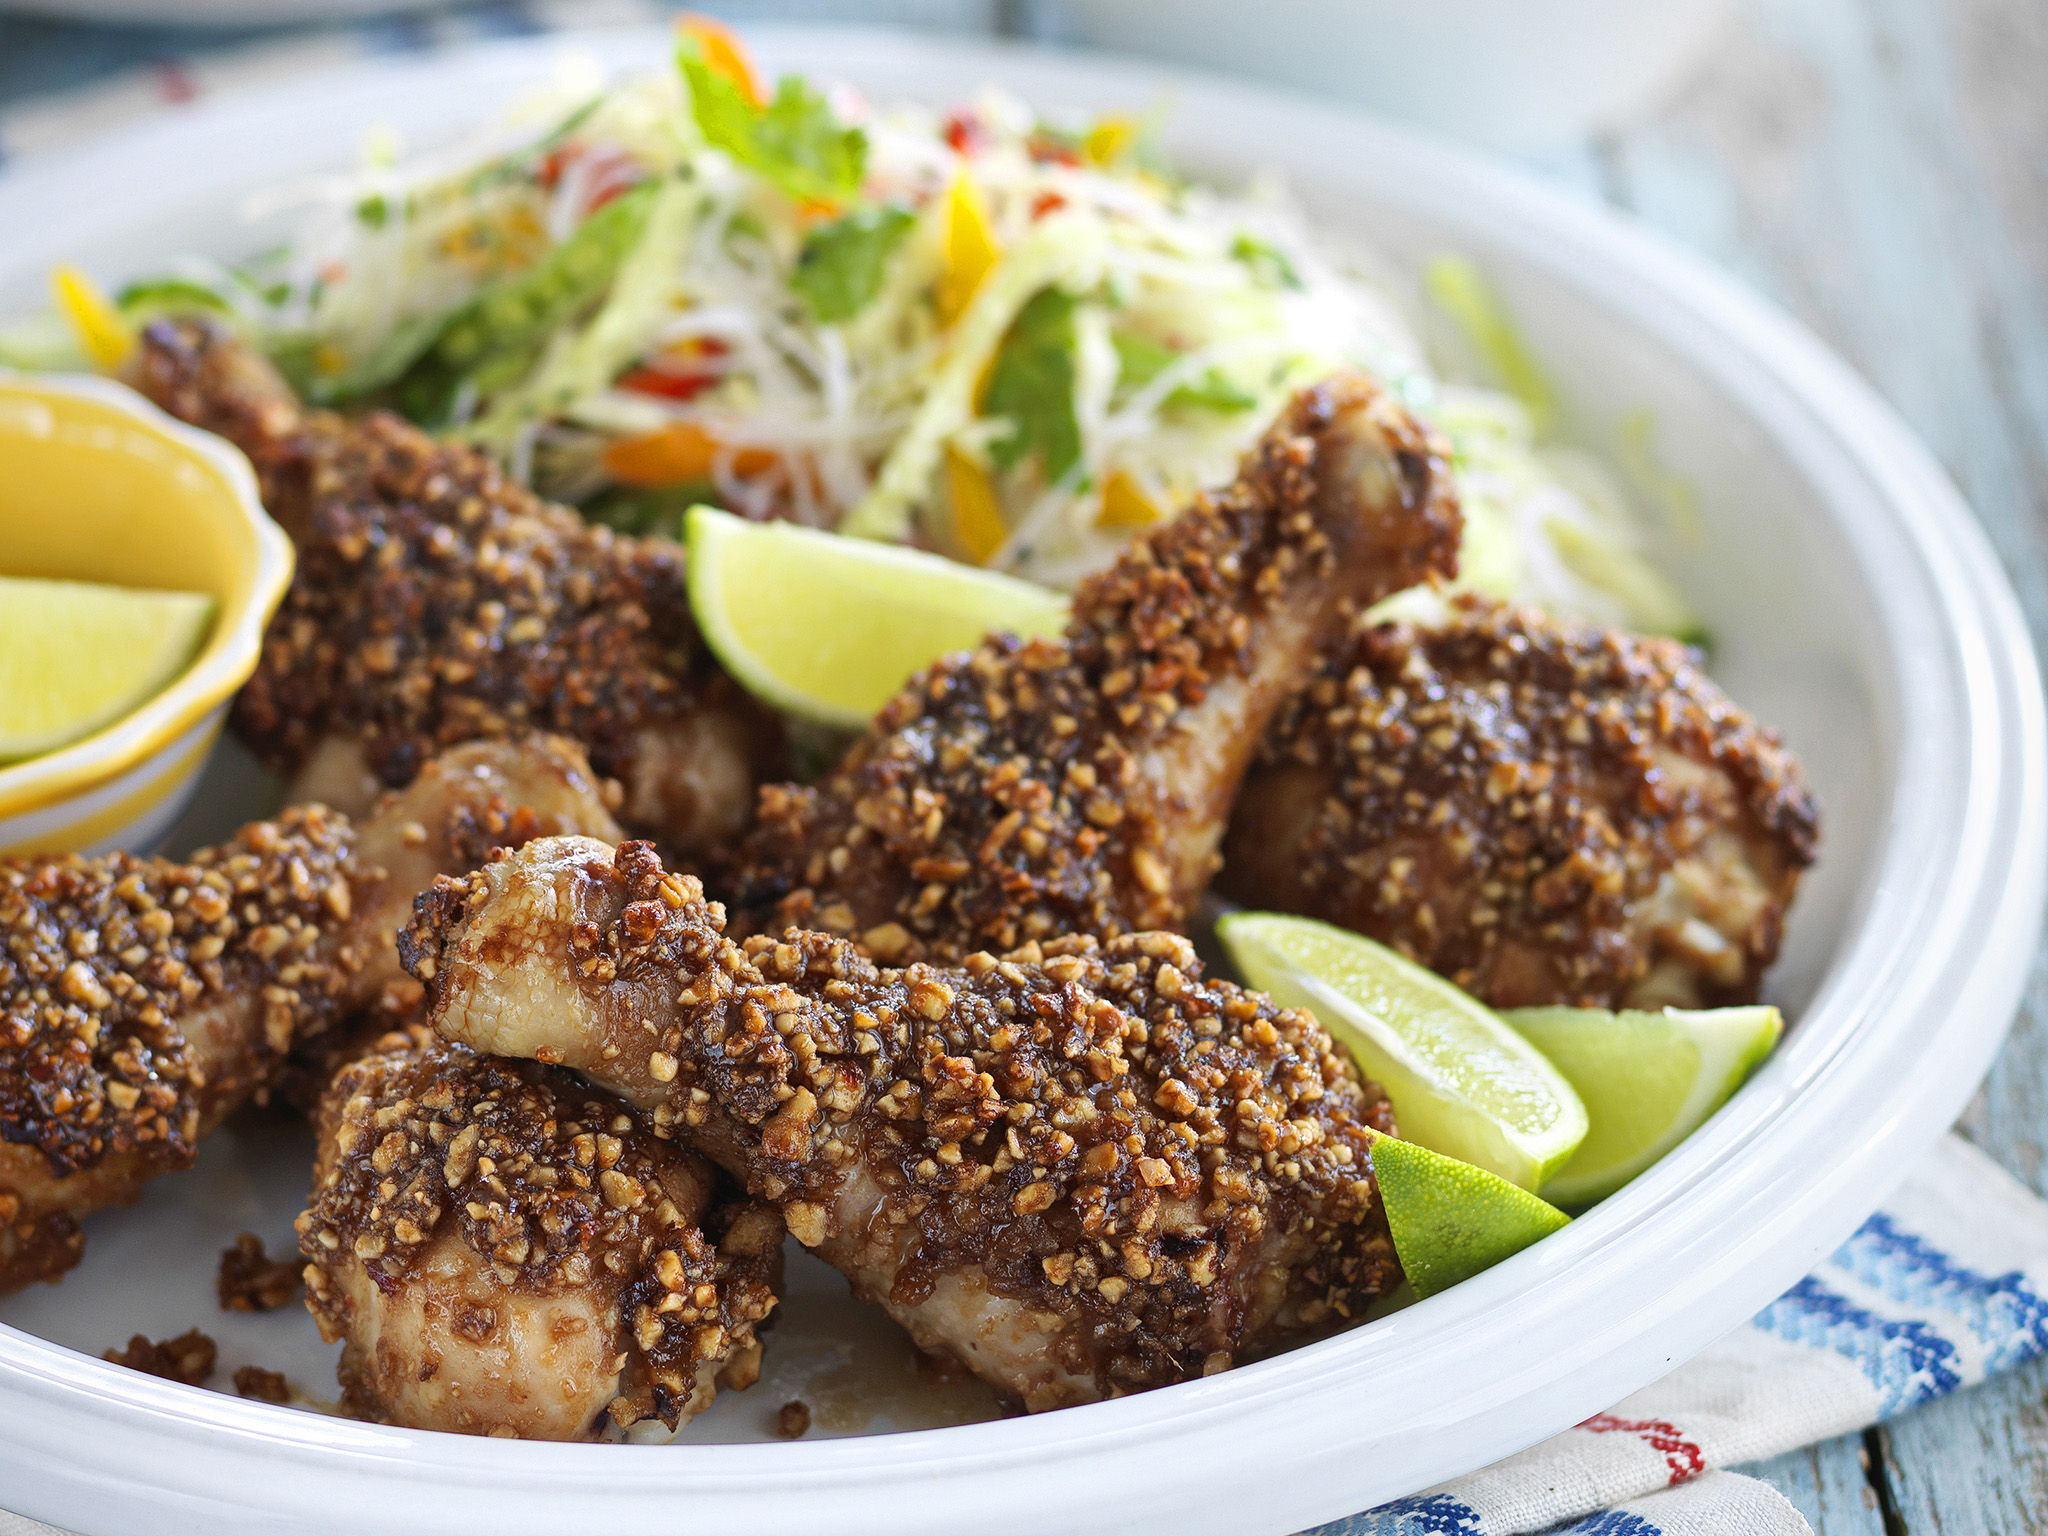 Chicken satay drumsticks with noodle salad